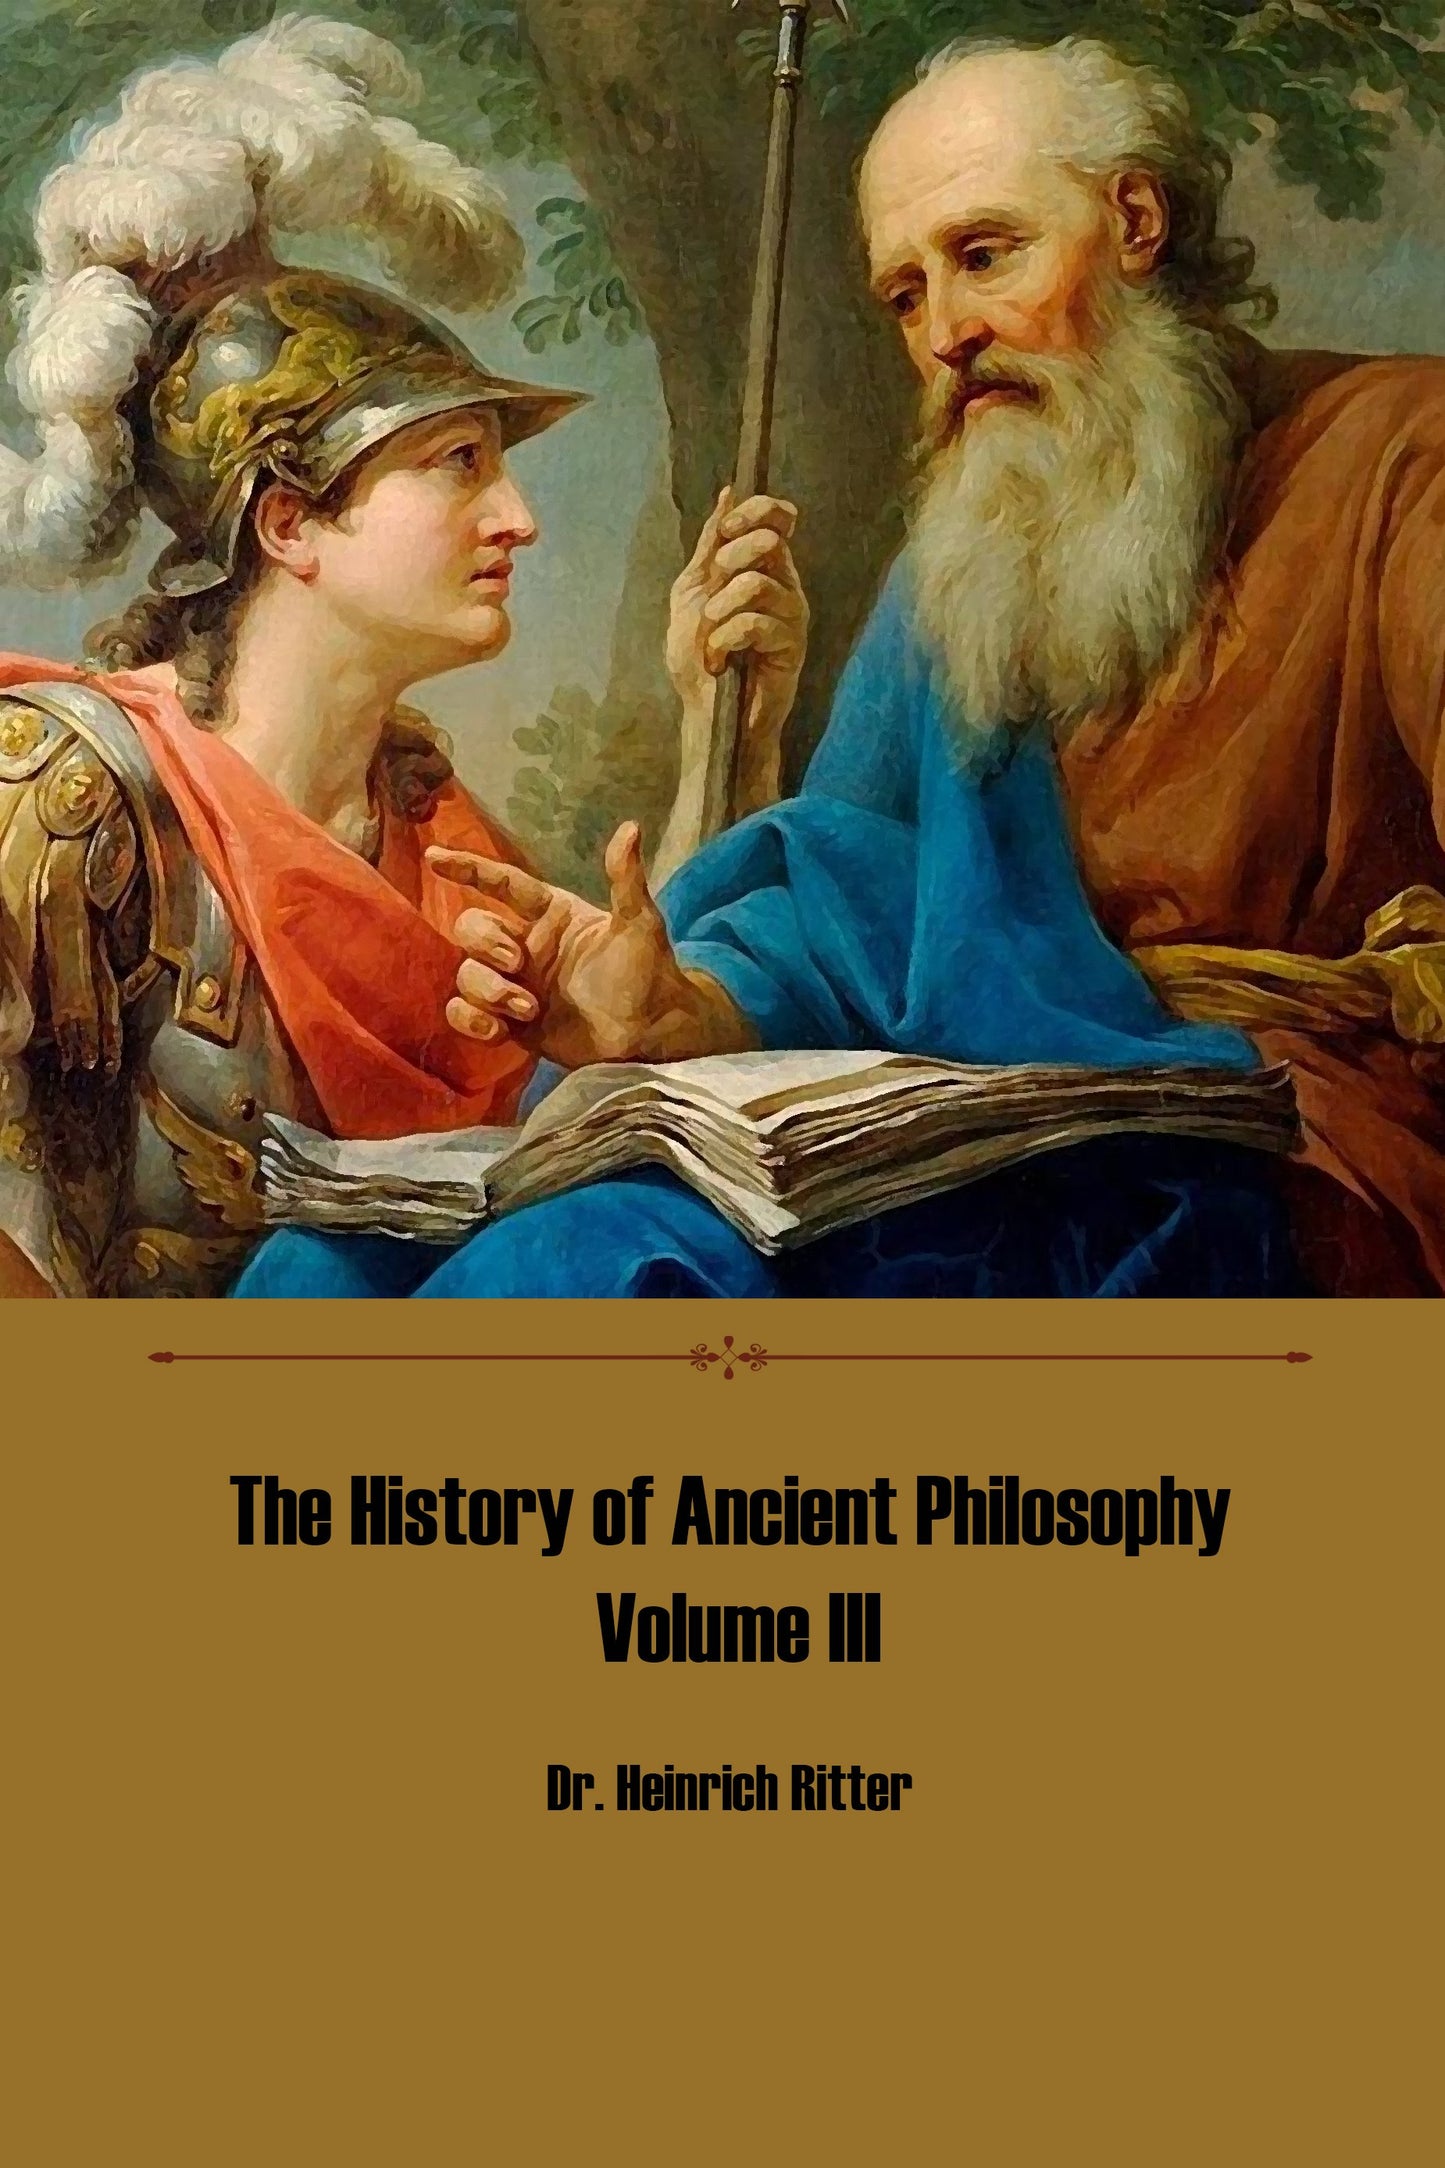 The History of Ancient Philosophy Volume III